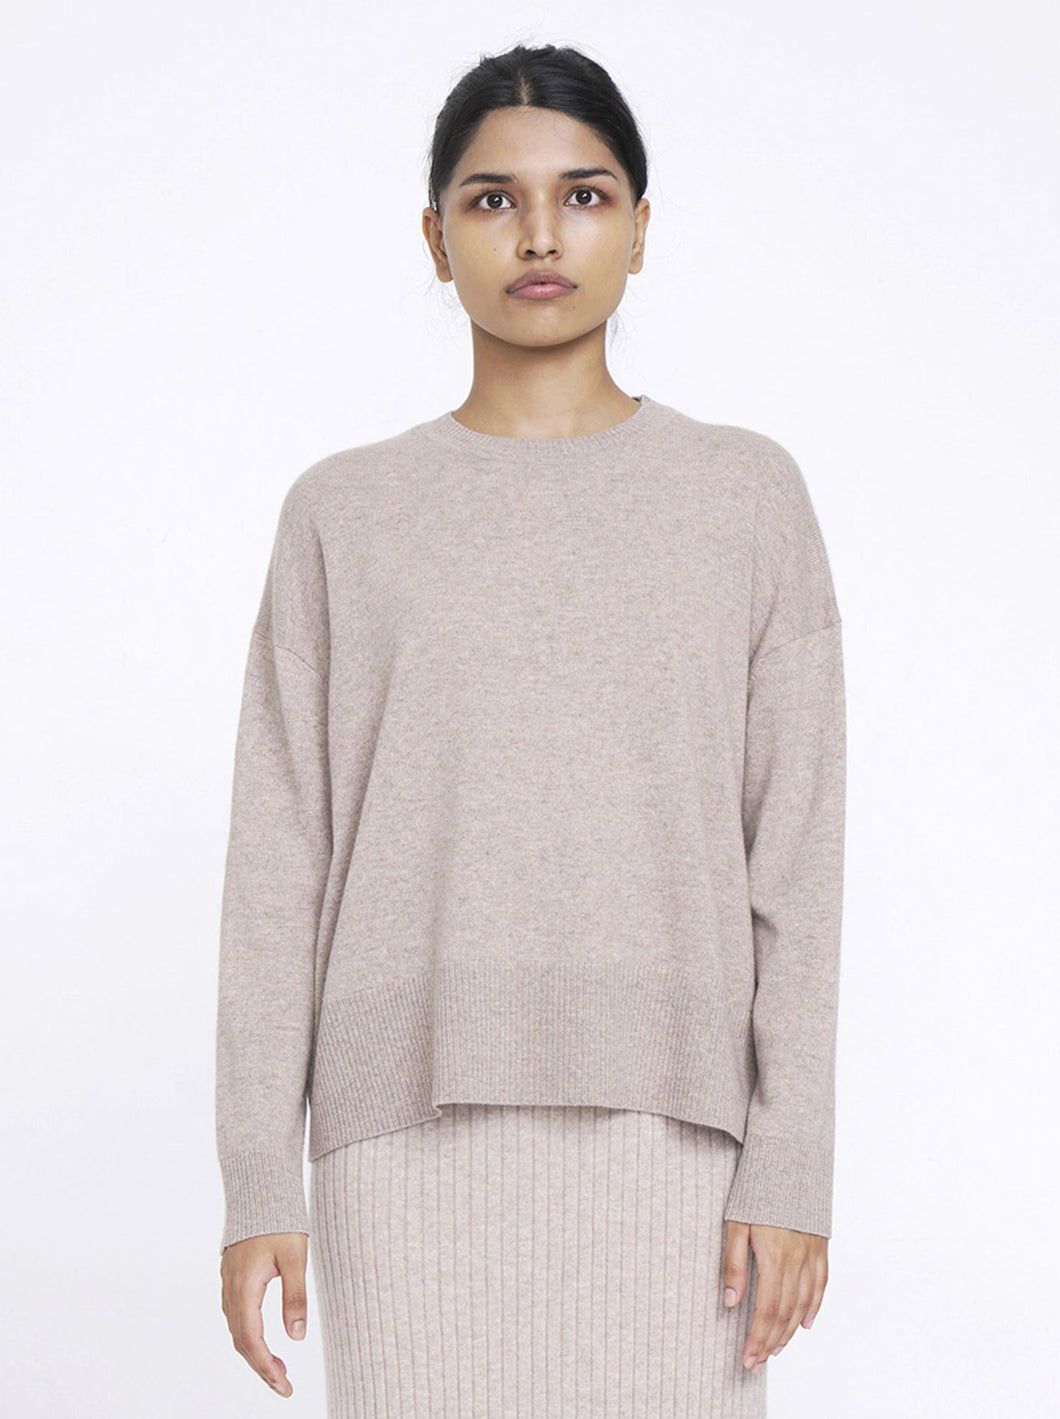 Cashmere Blend Crew by Aleger